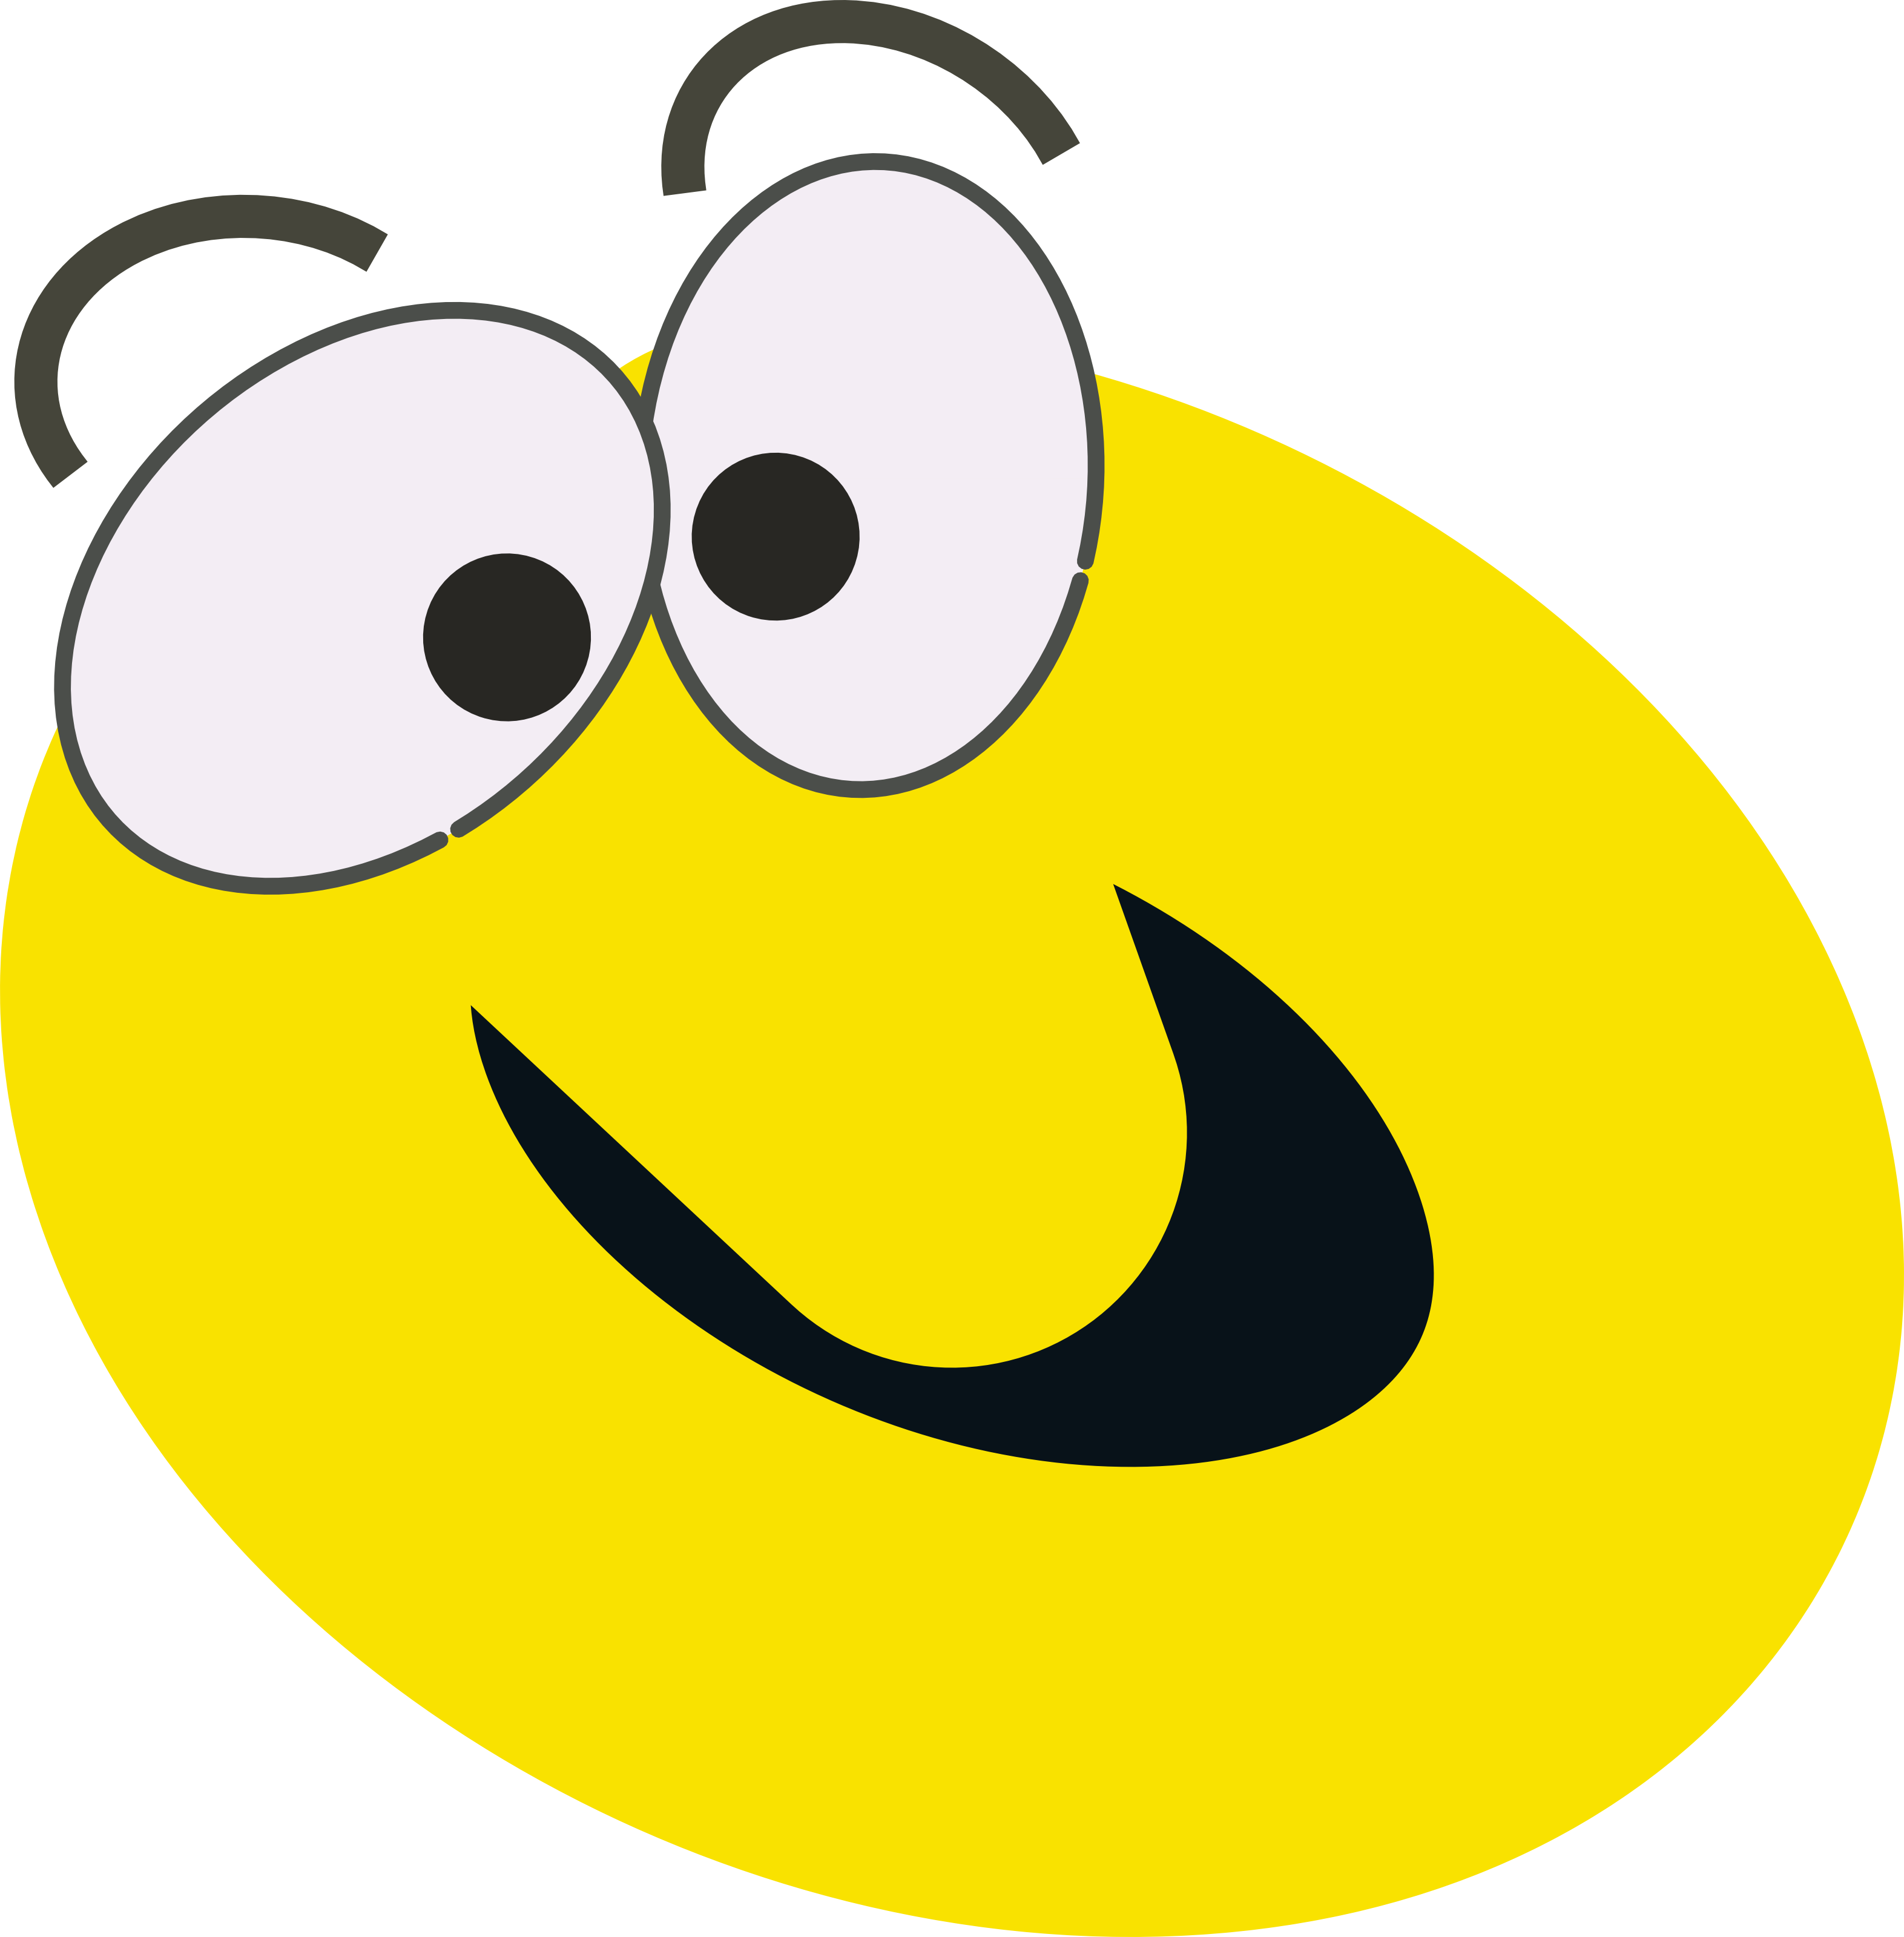 Smiley face clip art animated - Animated Clipart